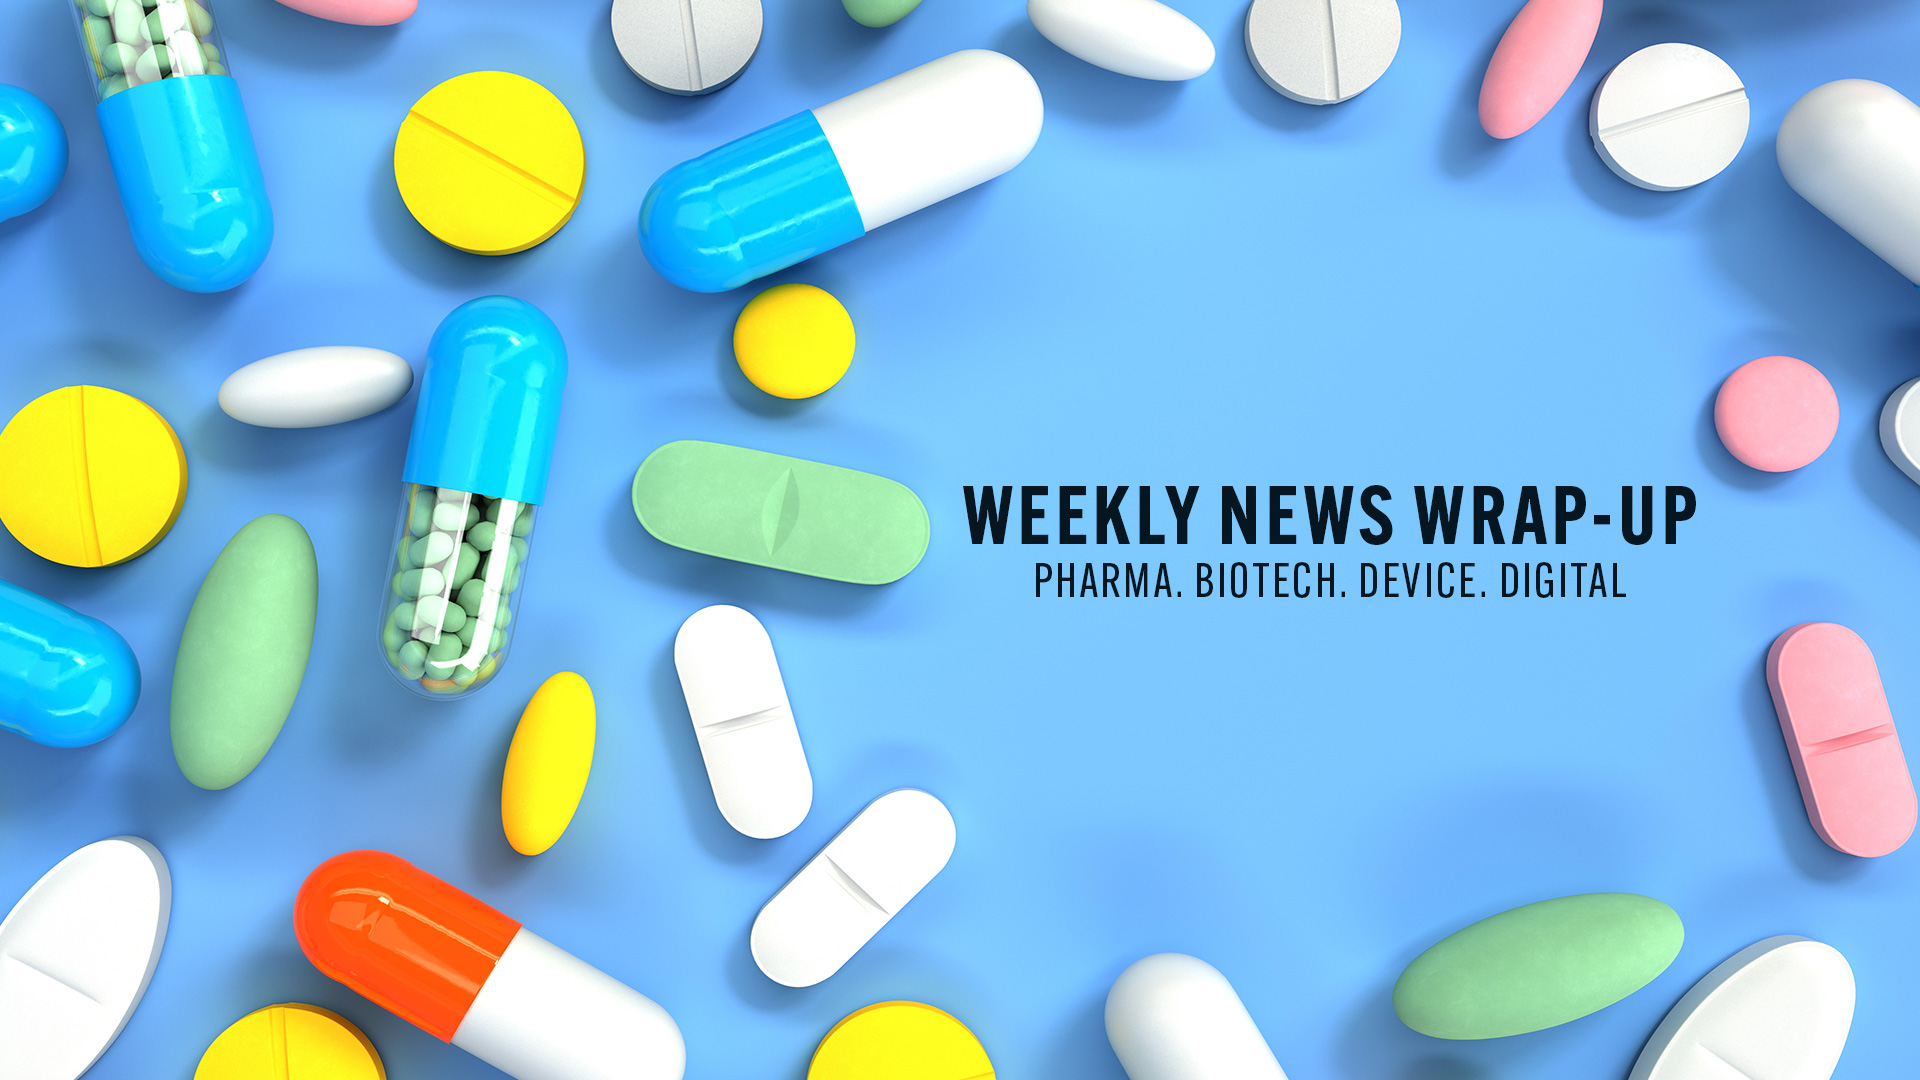 Healthcare Industry News Weekly Wrap-Up: May 12, 2022